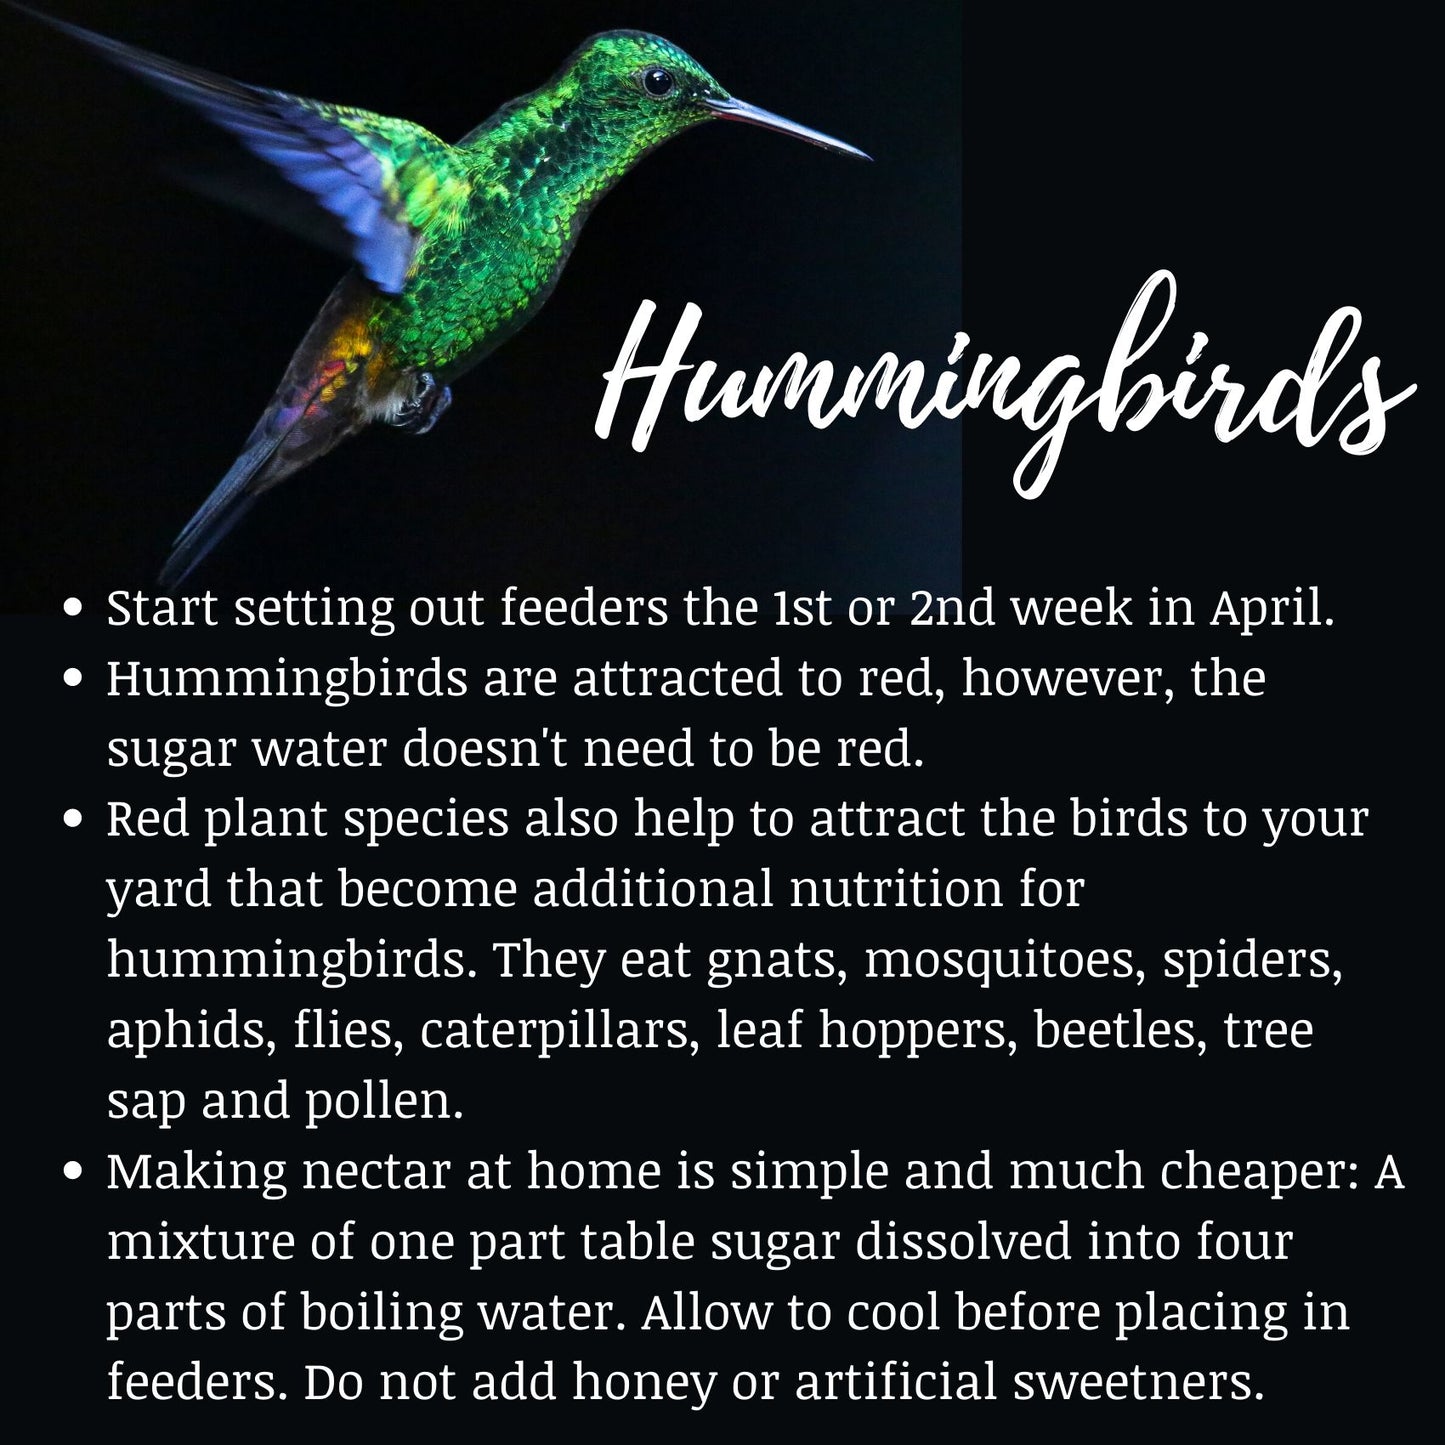 Fire Sale! Bumble Bee Hummingbird Feeder Outdoot Humming Birds Glass Nectar Feeders - Red